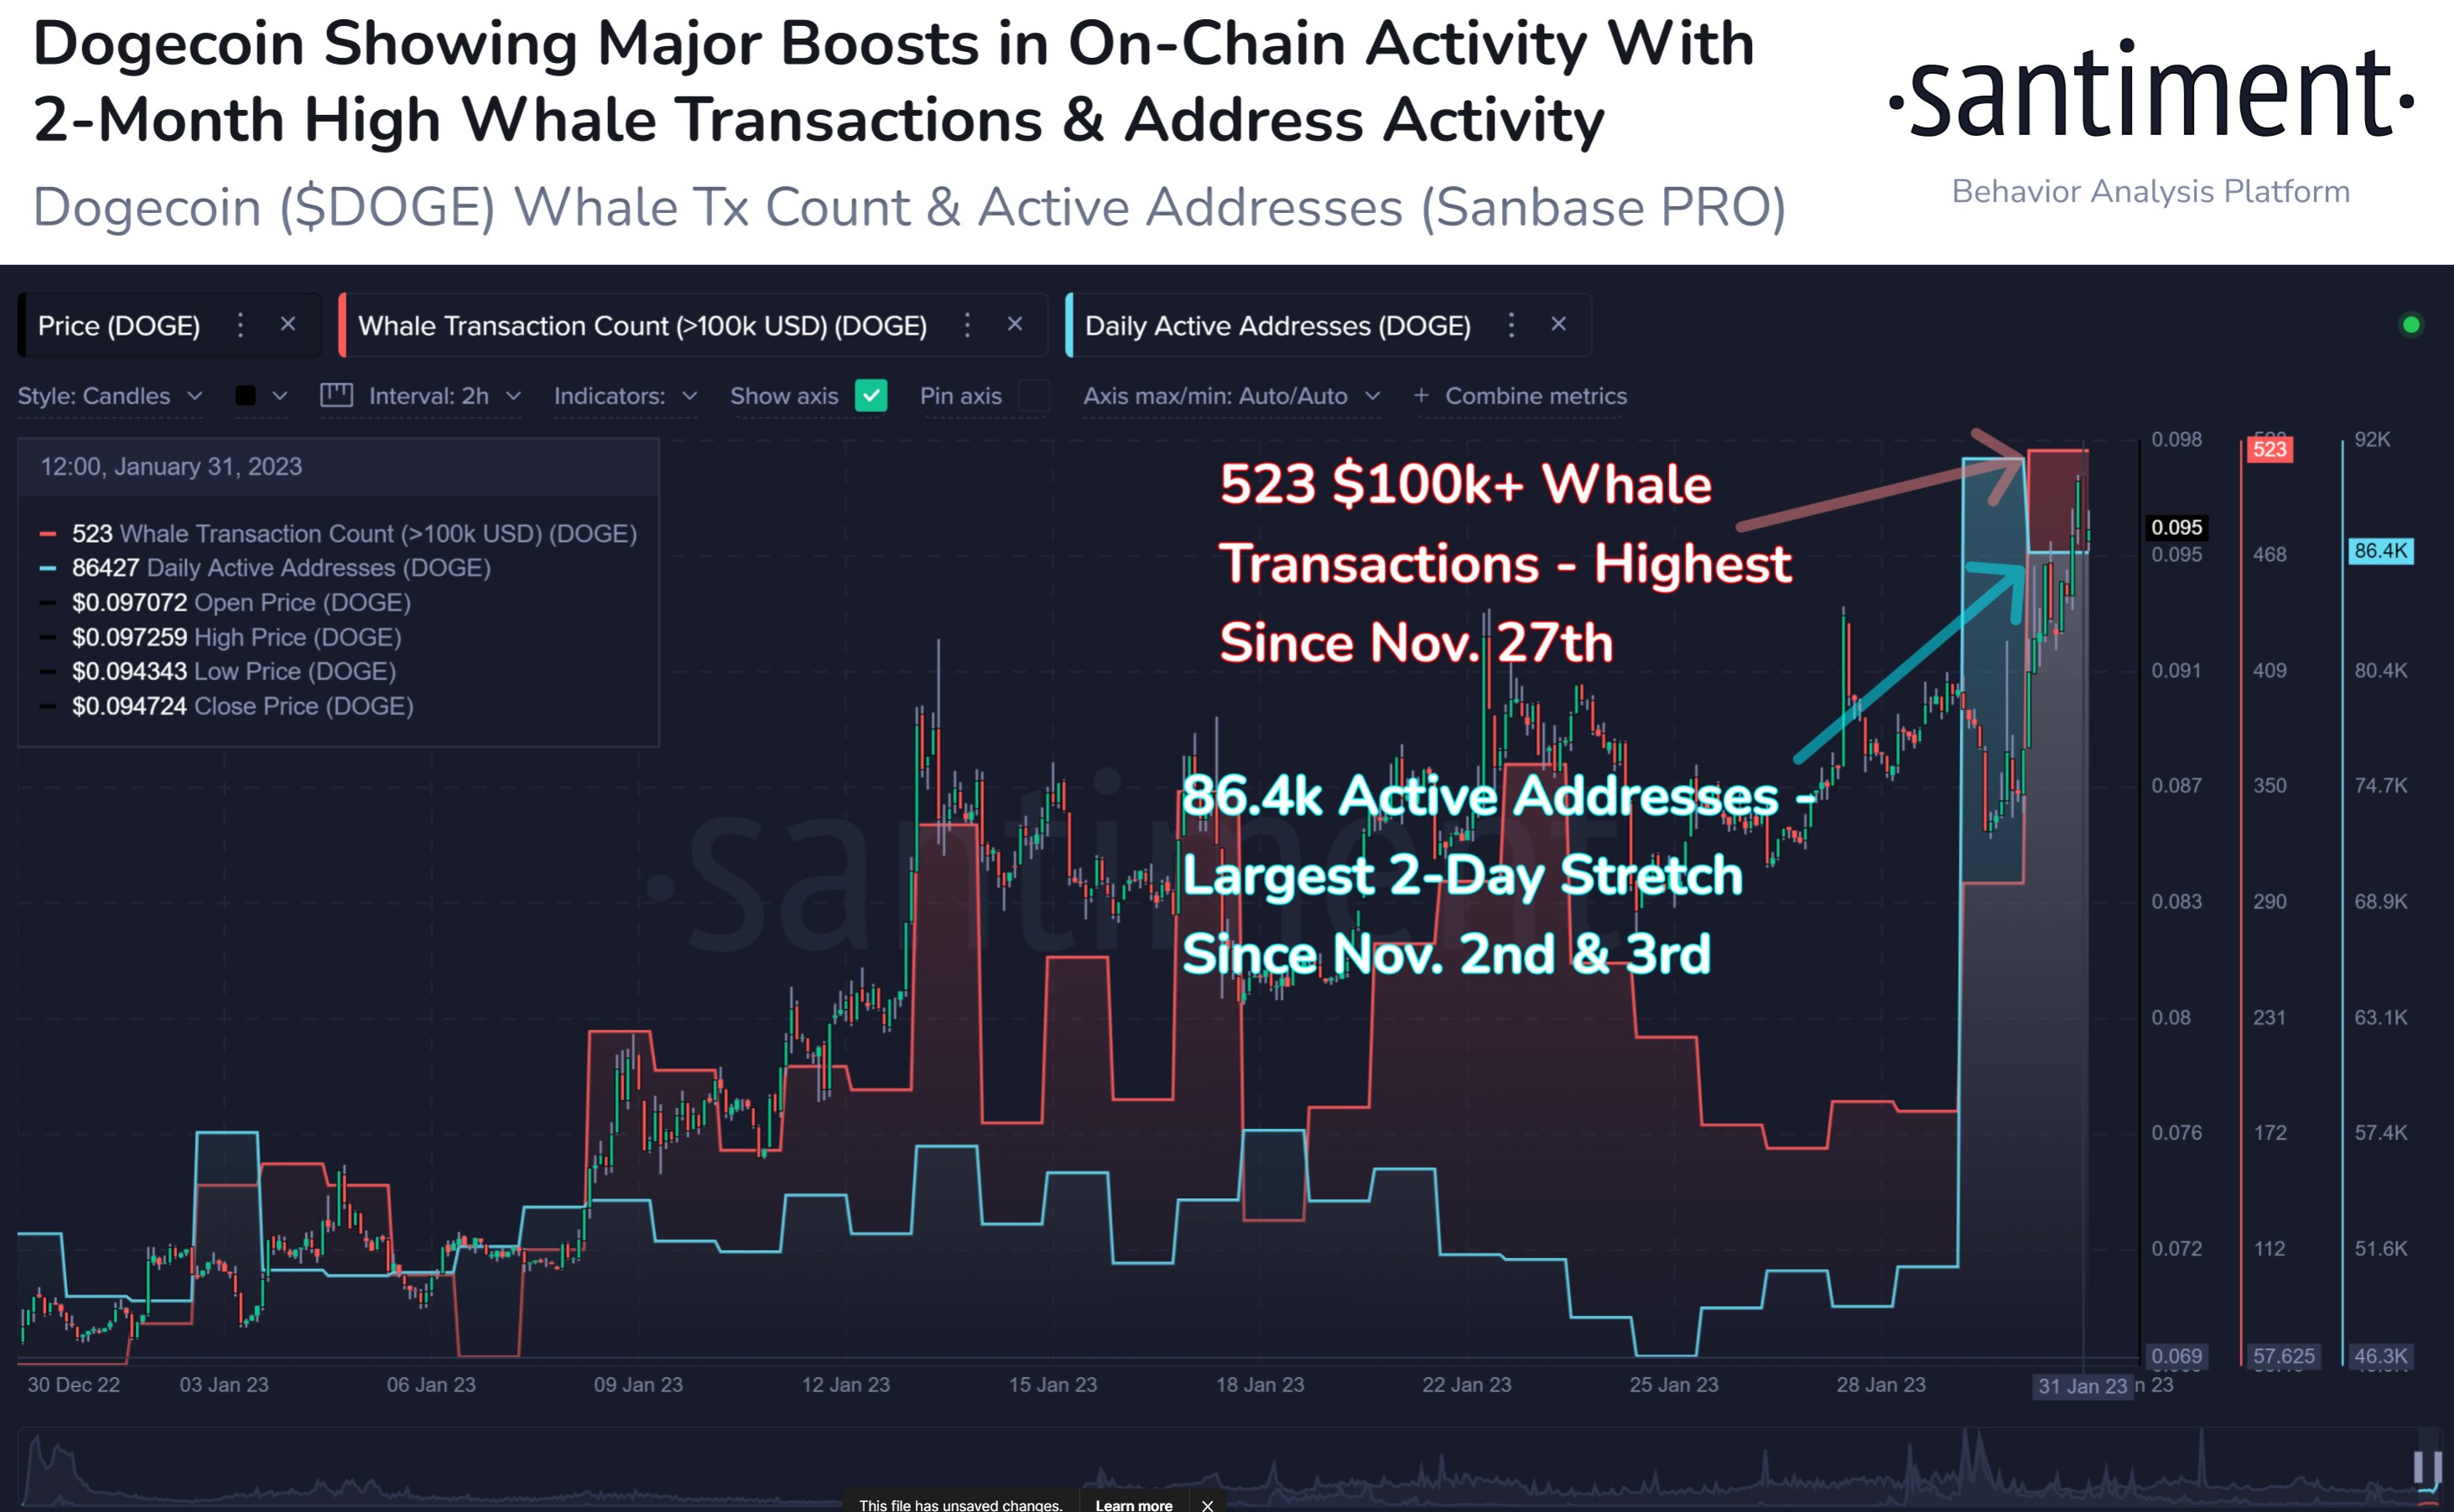 Dogecoin sees spike in whale activity and large volume transactions